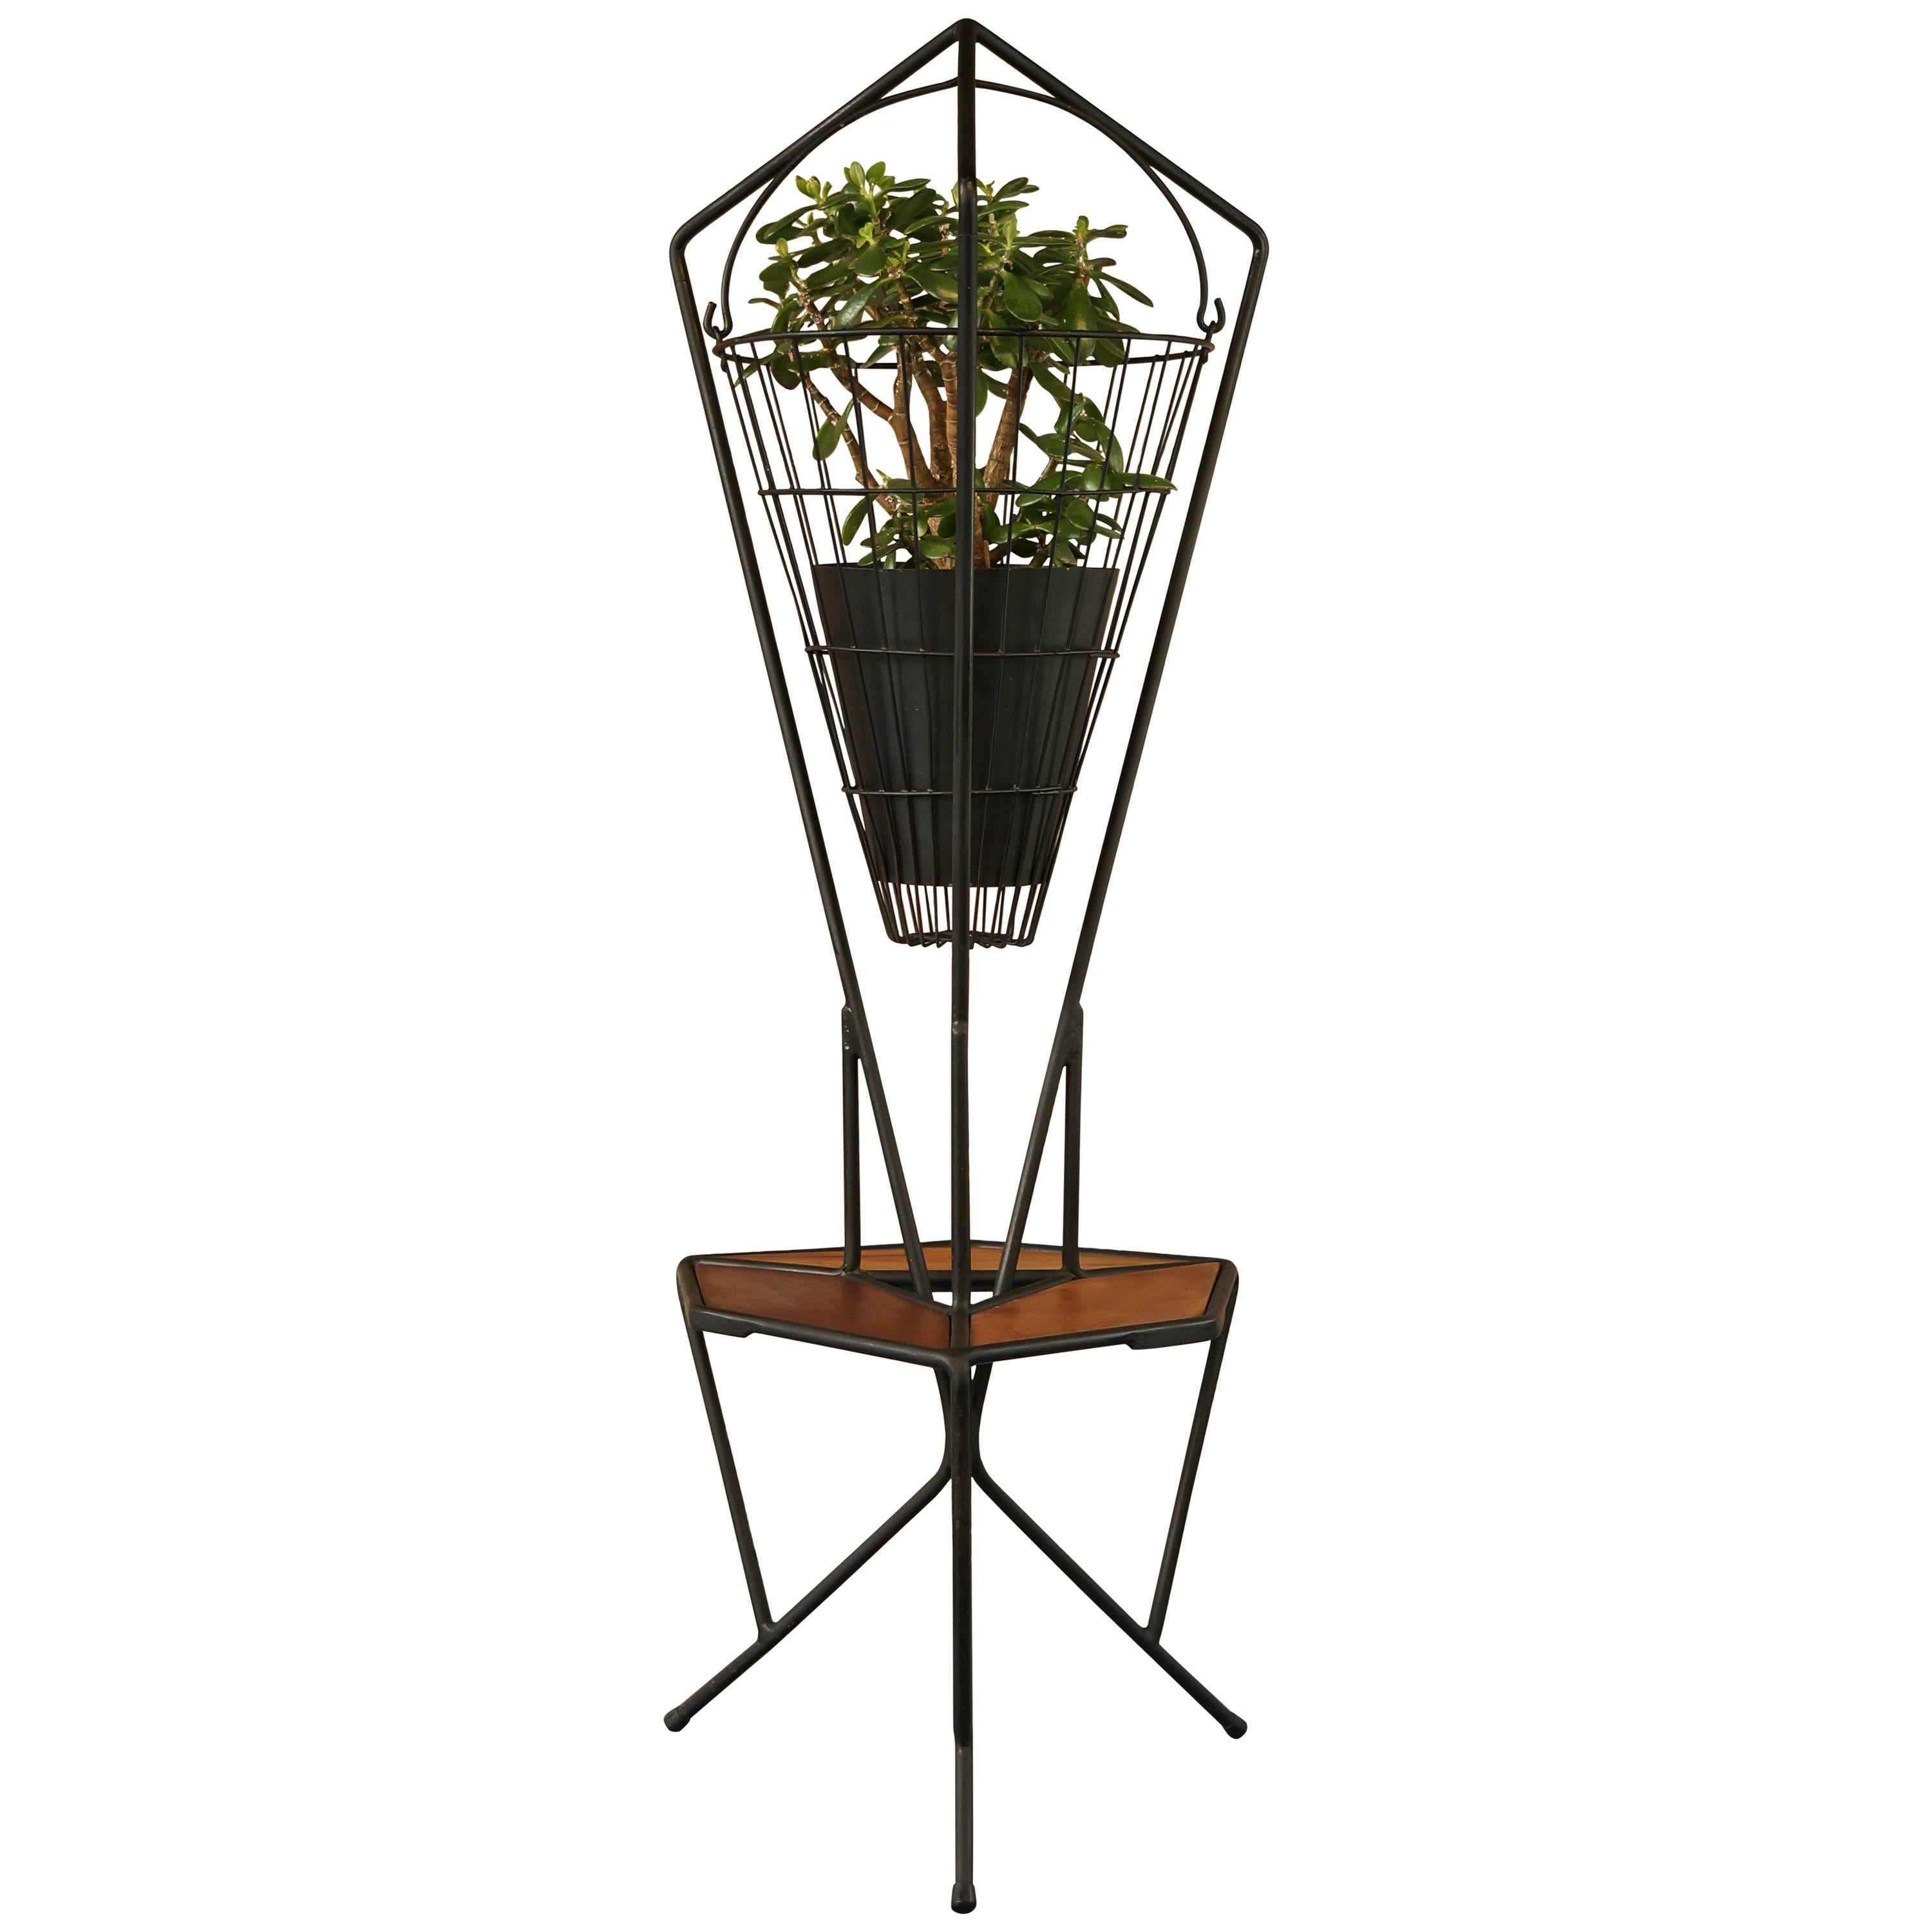 Unique midcentury vintage 1960s iron and teak hanging planter, plant stand, side table offered in excellent condition throughout. Dimensions: Height 132cm, height to shelf 38.5cm, width 48cm, depth 50cm.